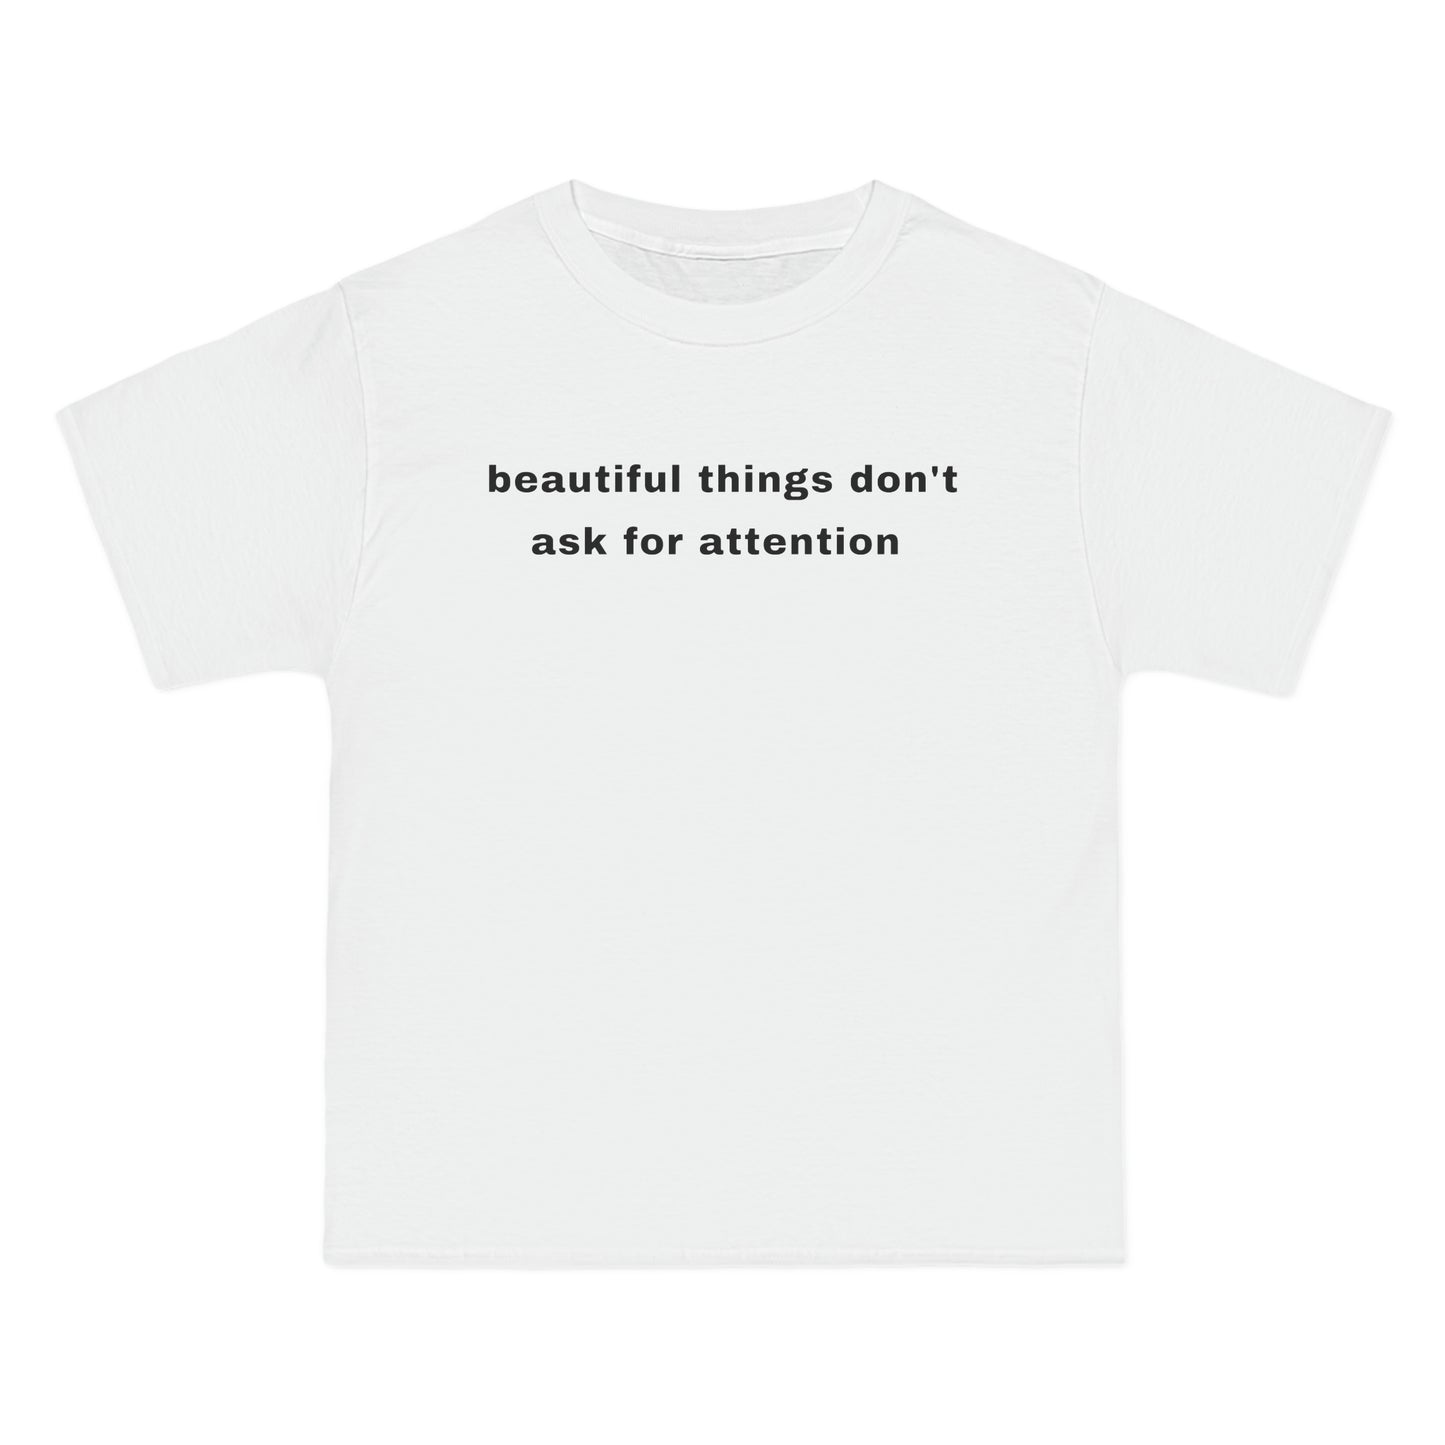 beautiful things don't ask for attention Tee